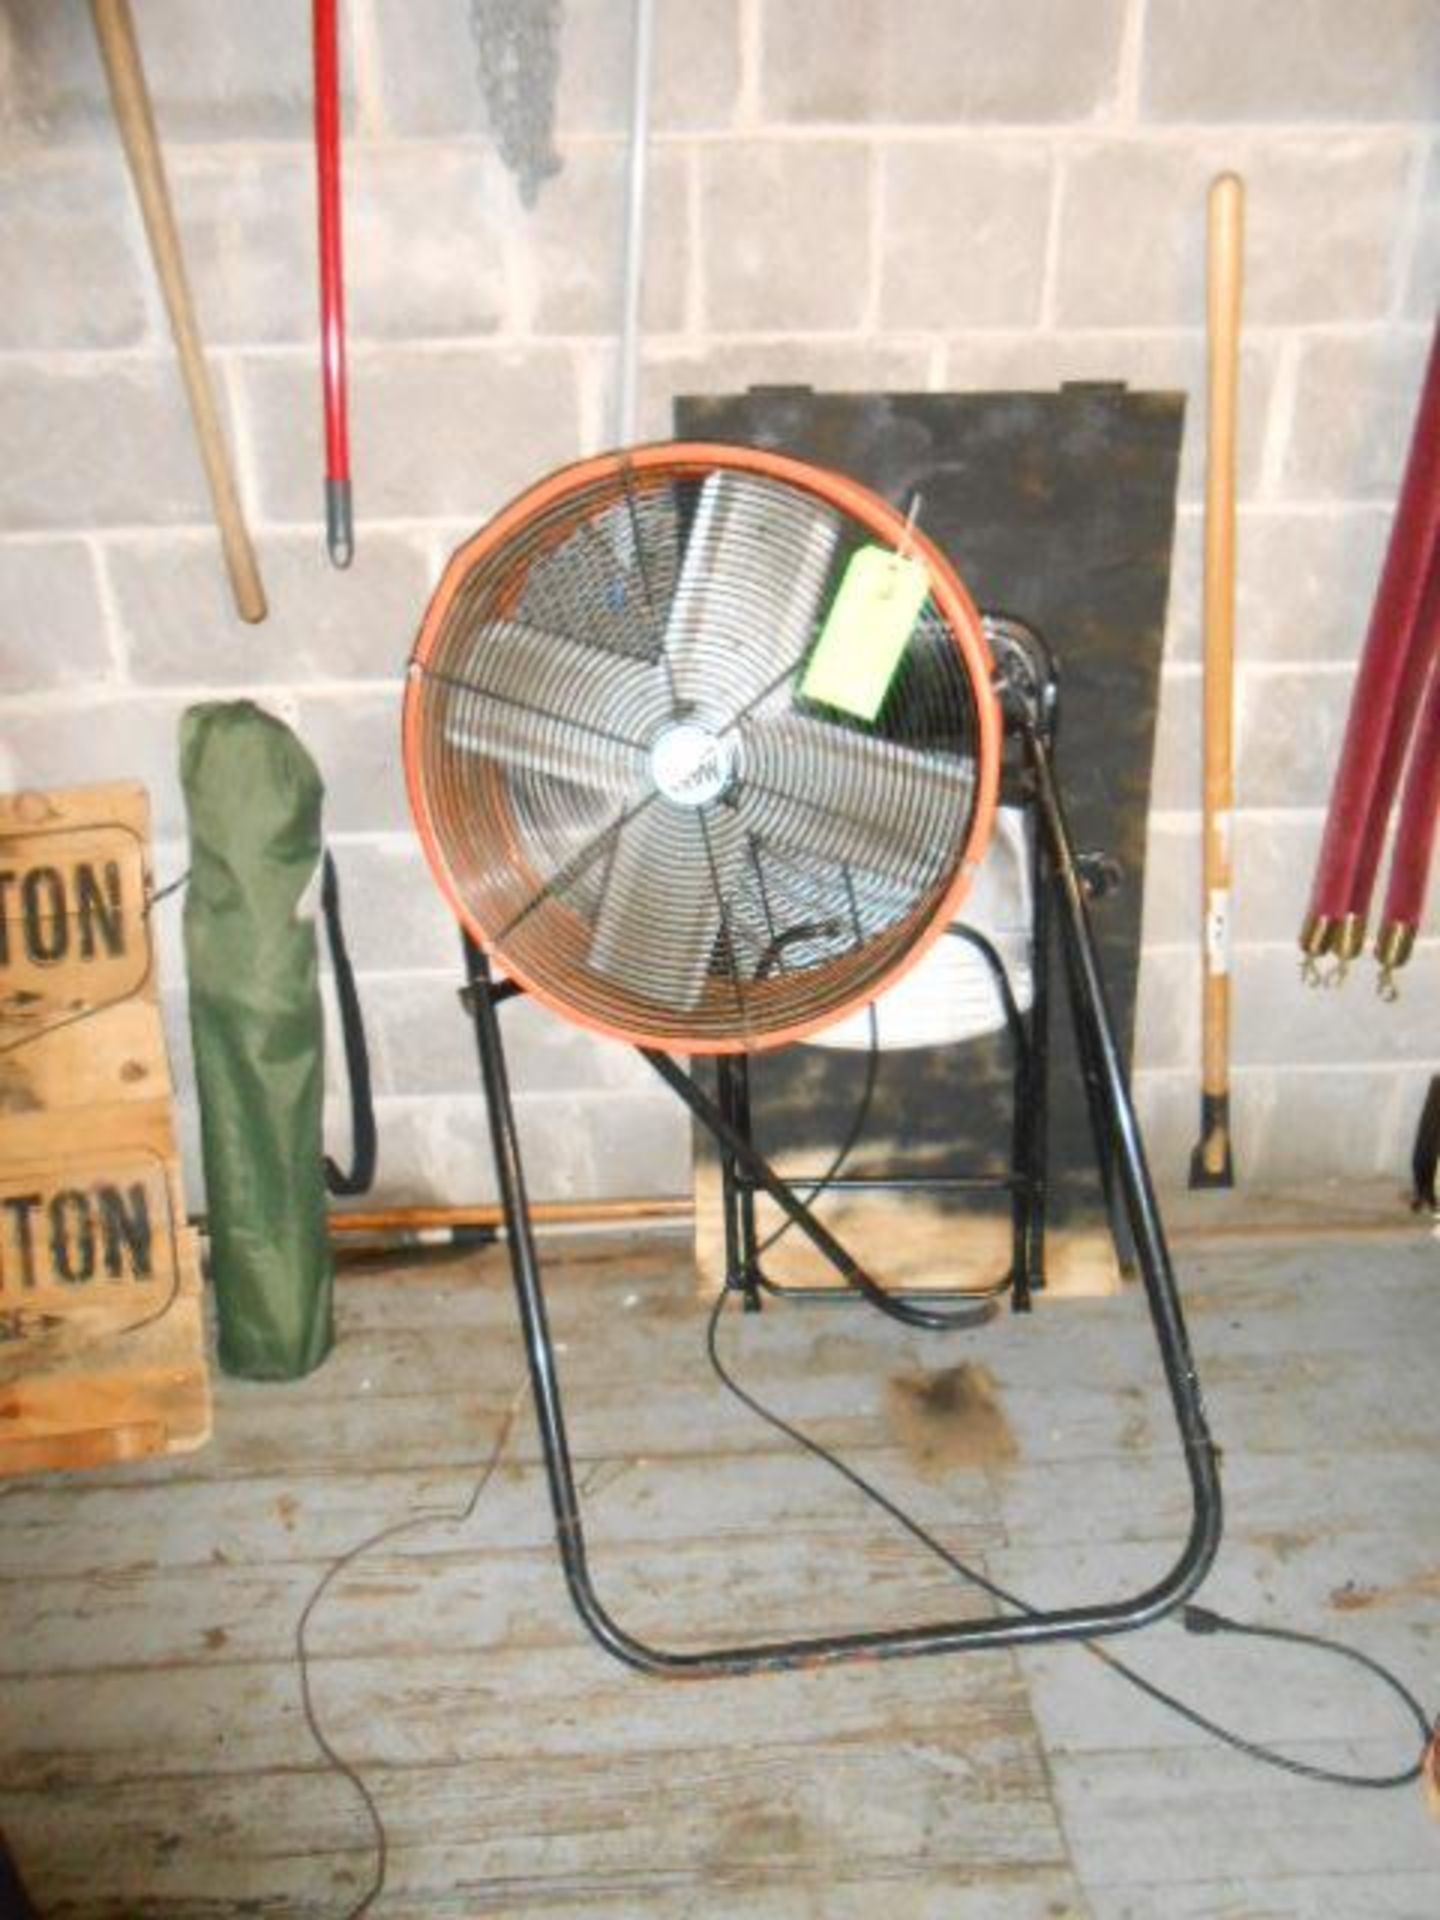 LOT of 2 Maxx Air Pro fan, 24 in dia blade, 115 vac ***NOTE FROM AUCTIONEER*** Rigging and Loading - Image 2 of 2